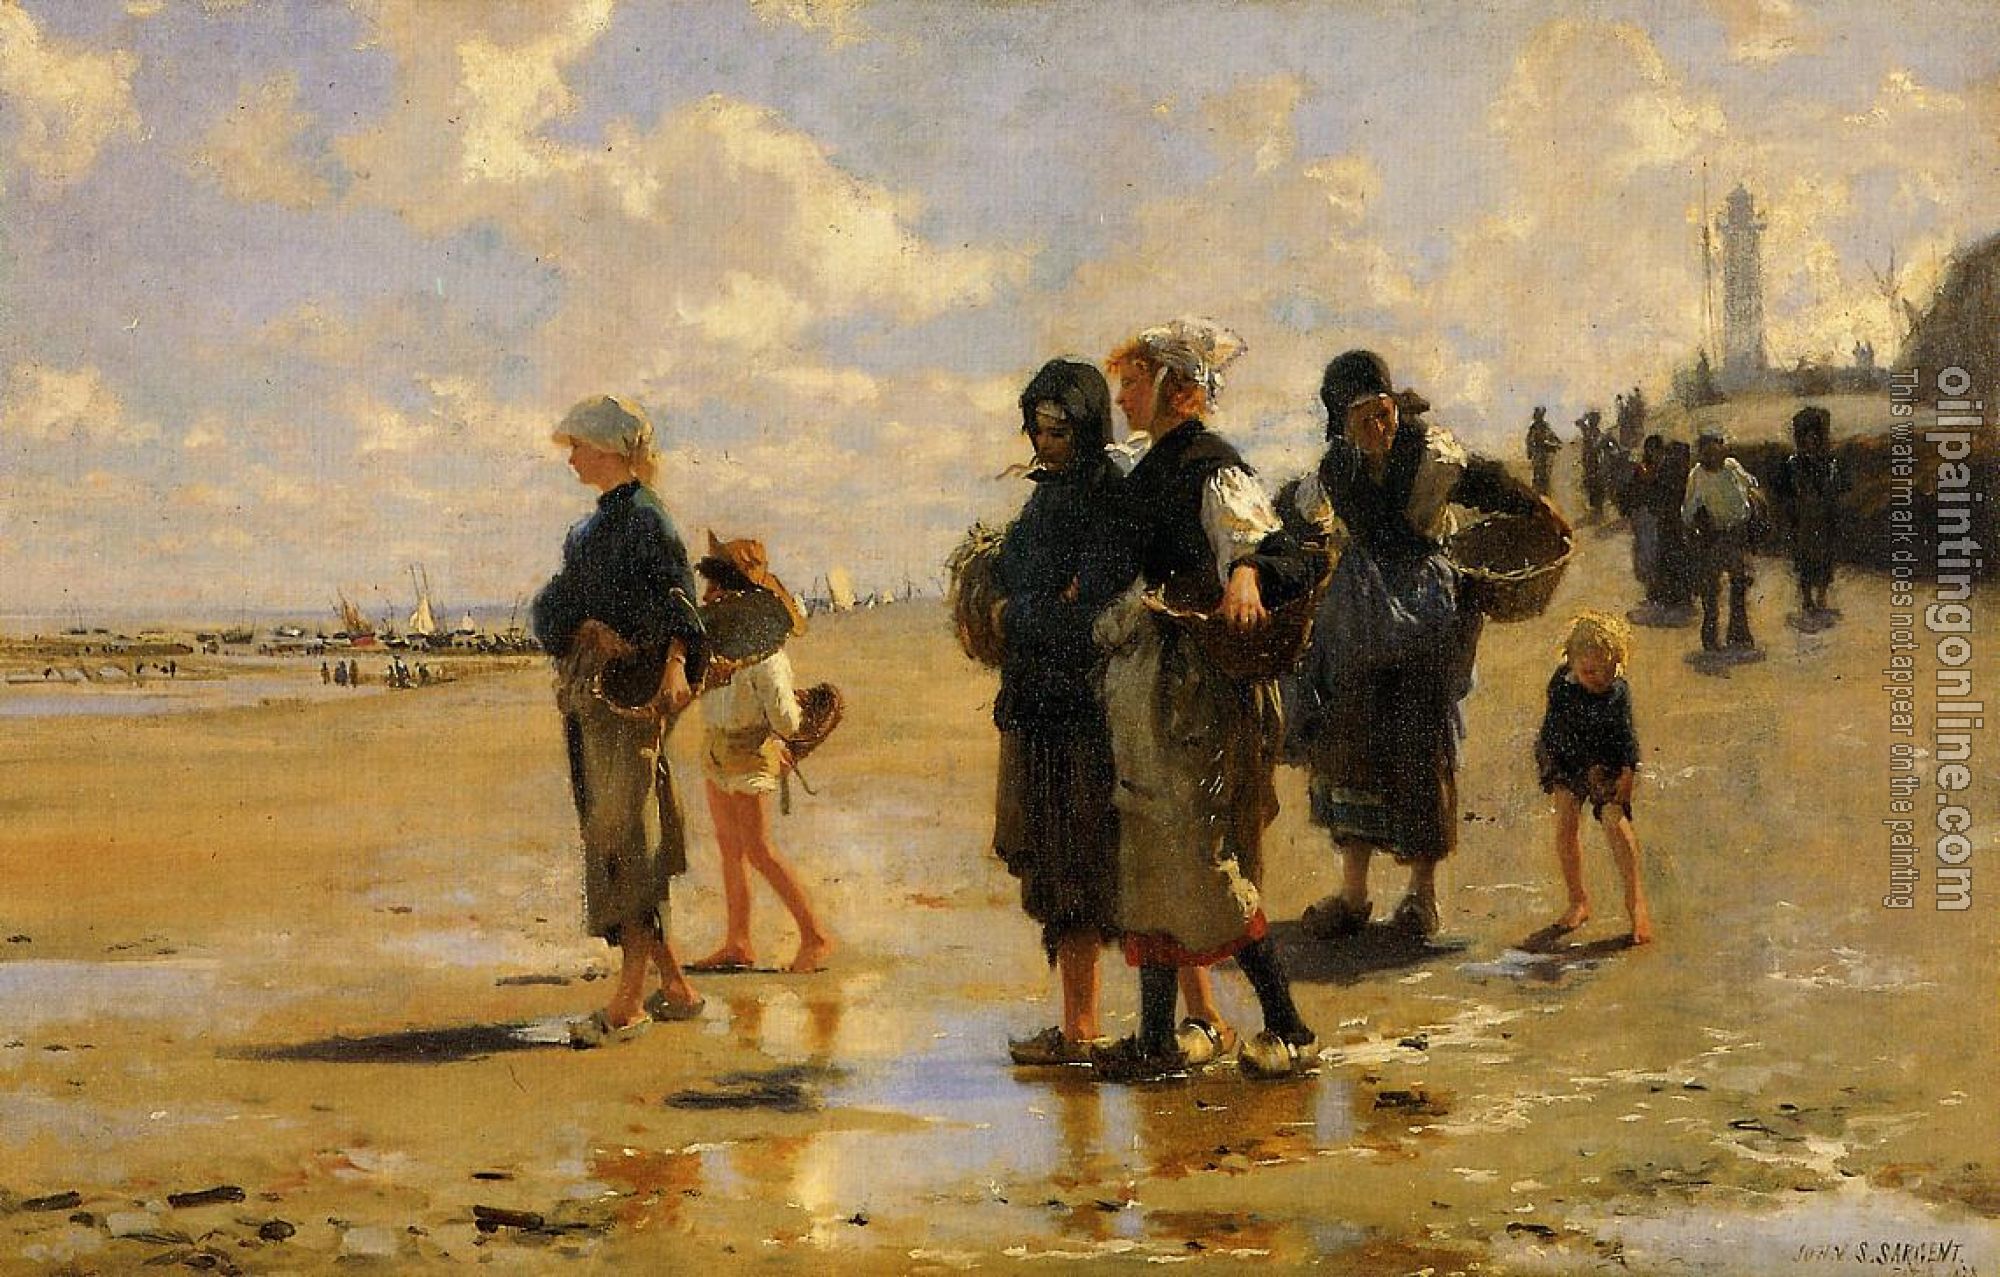 Sargent, John Singer - The Oyster Gatherers of Cancale